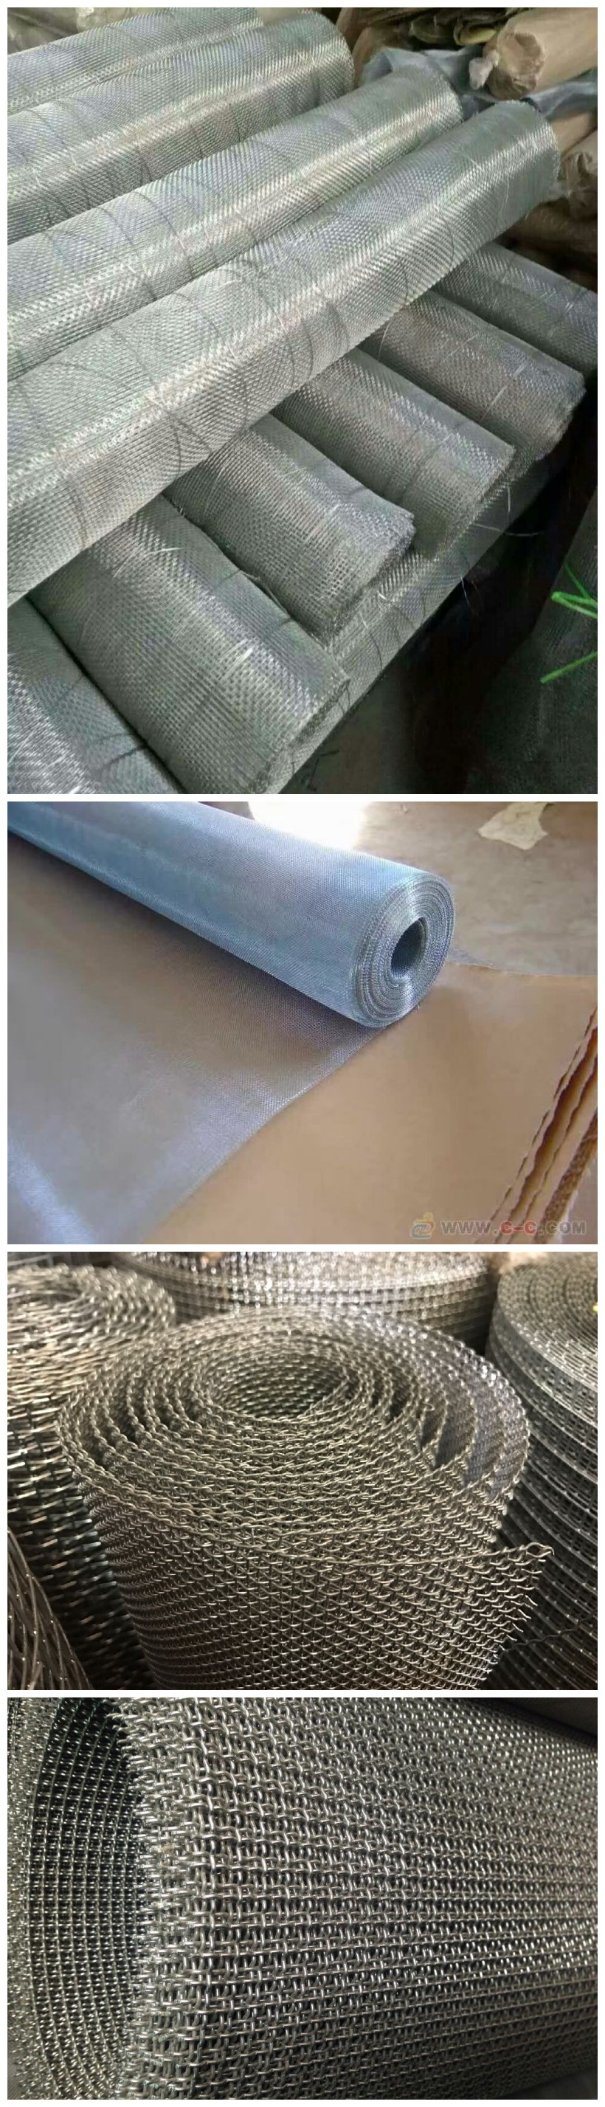 Square Mesh Welded Wire Mesh/Steel Welded Wire Mesh